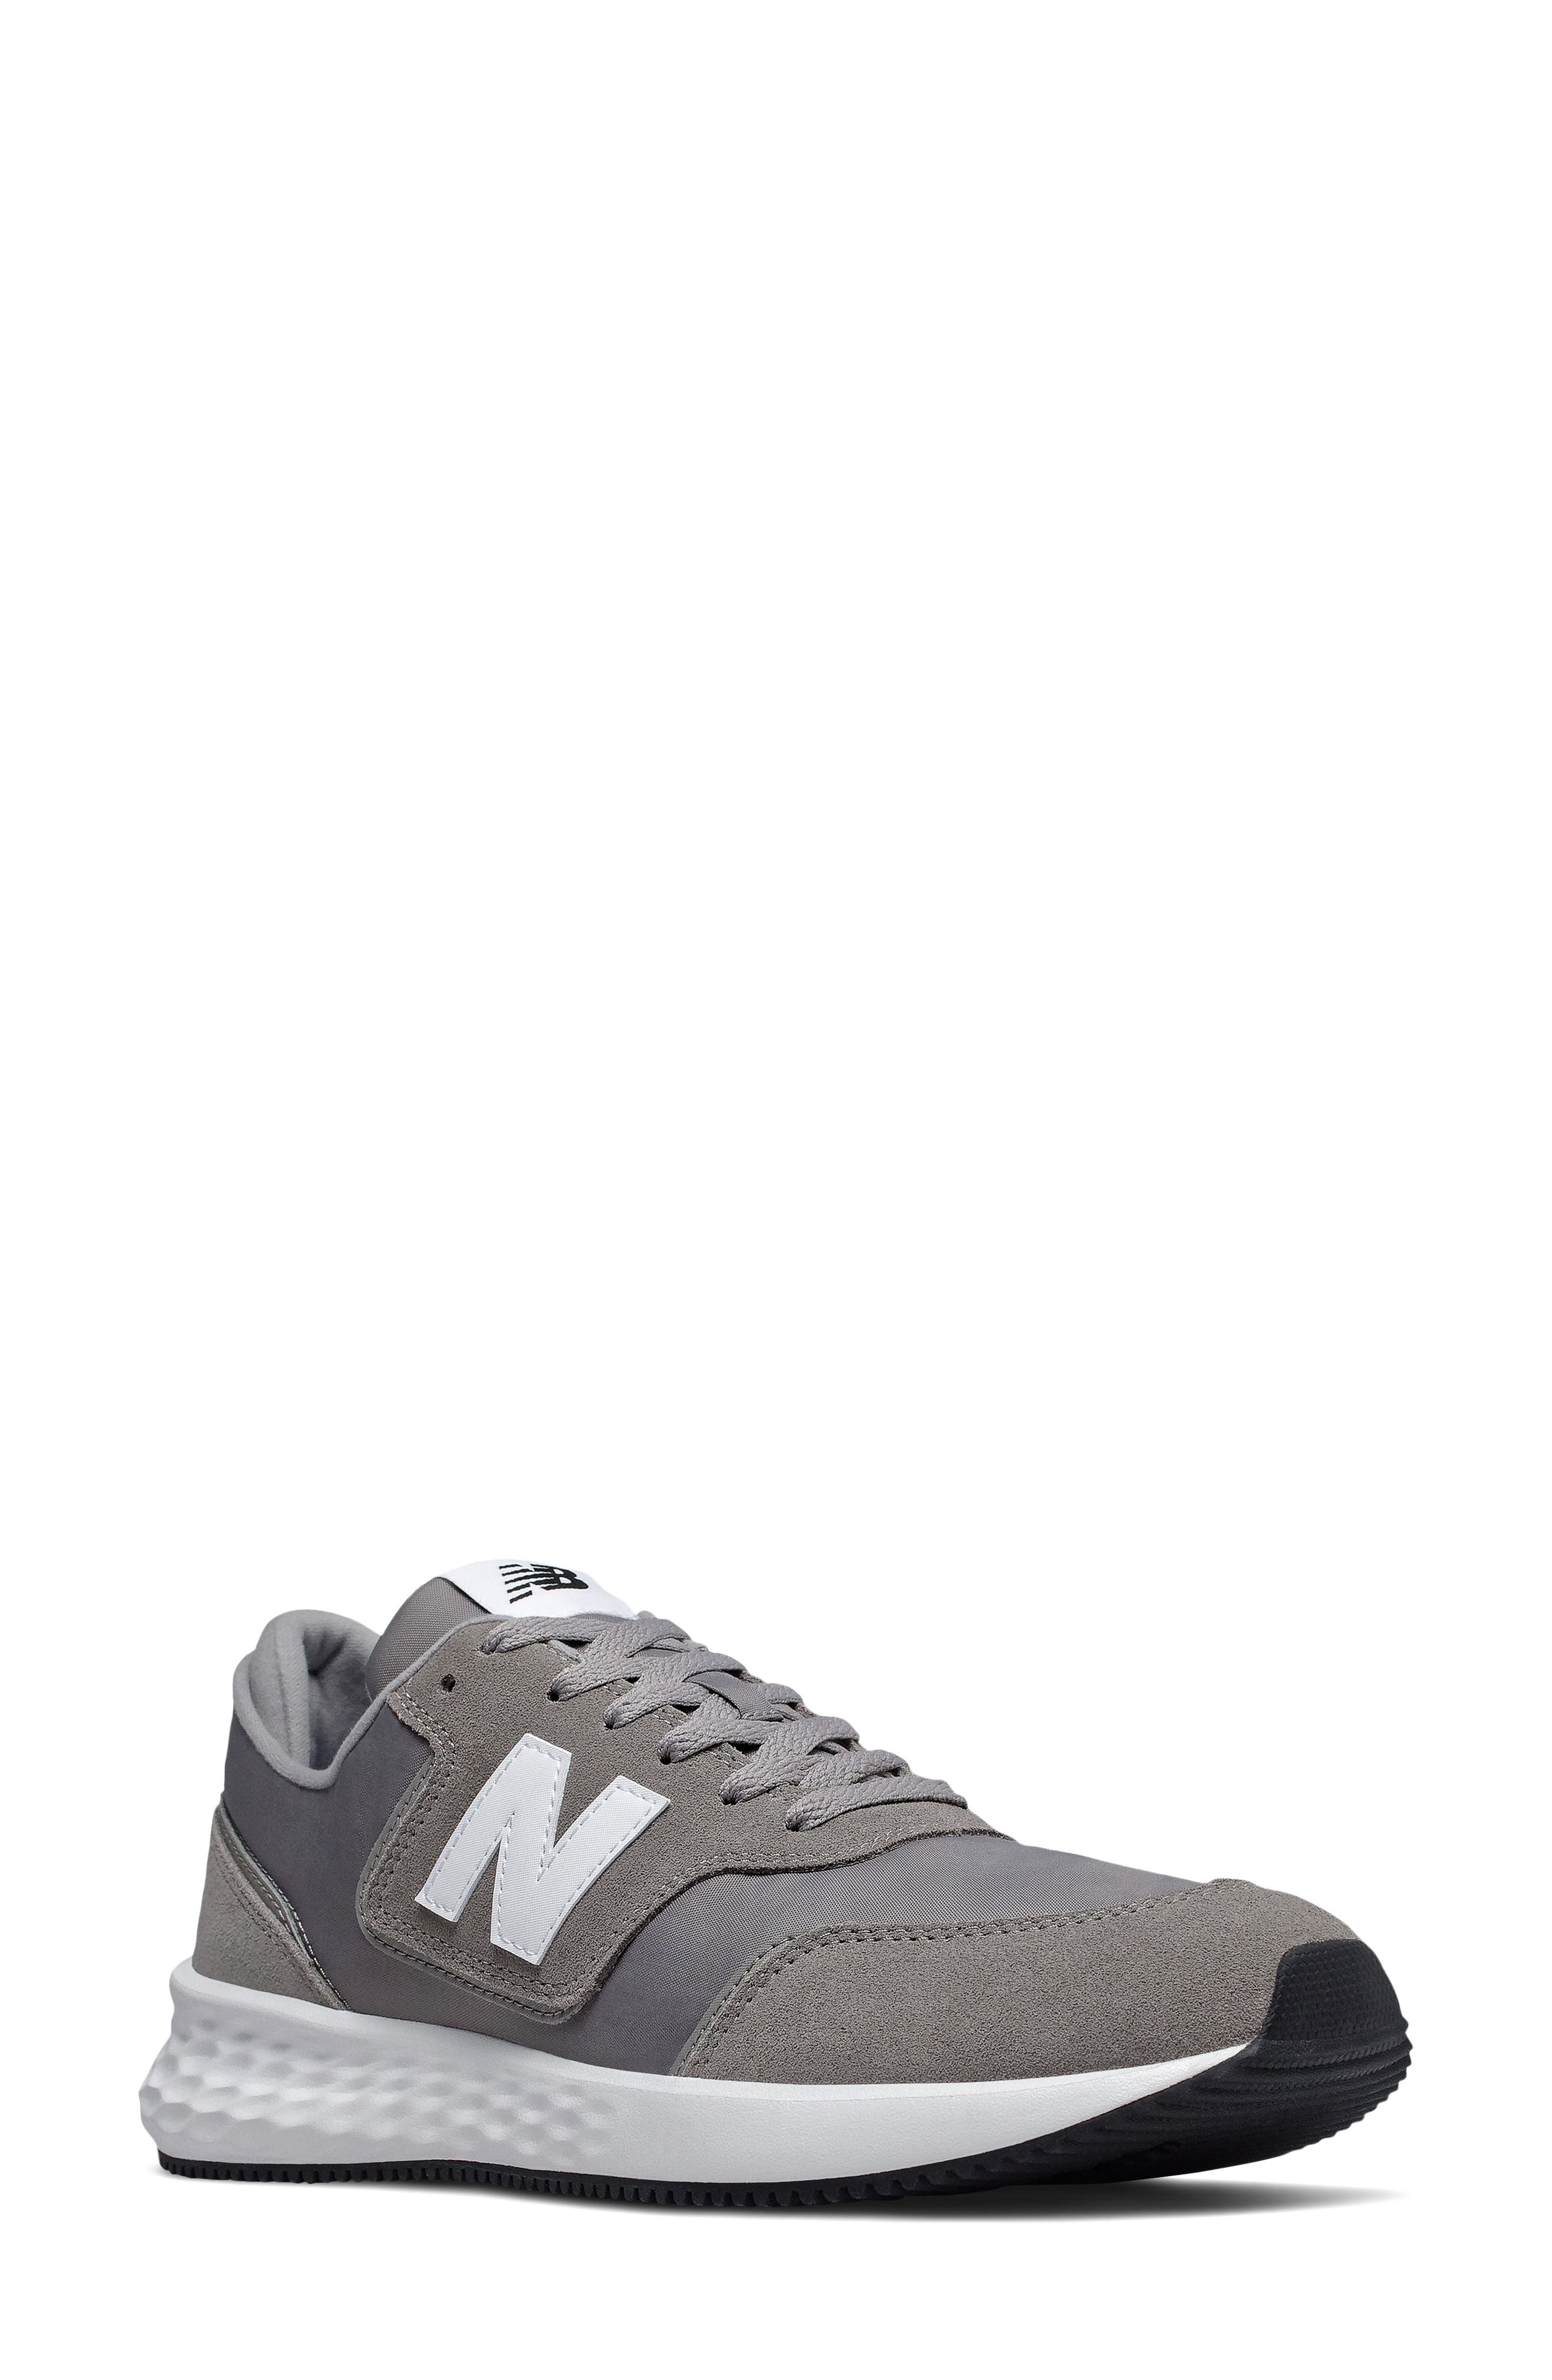 mens new balance white sneakers